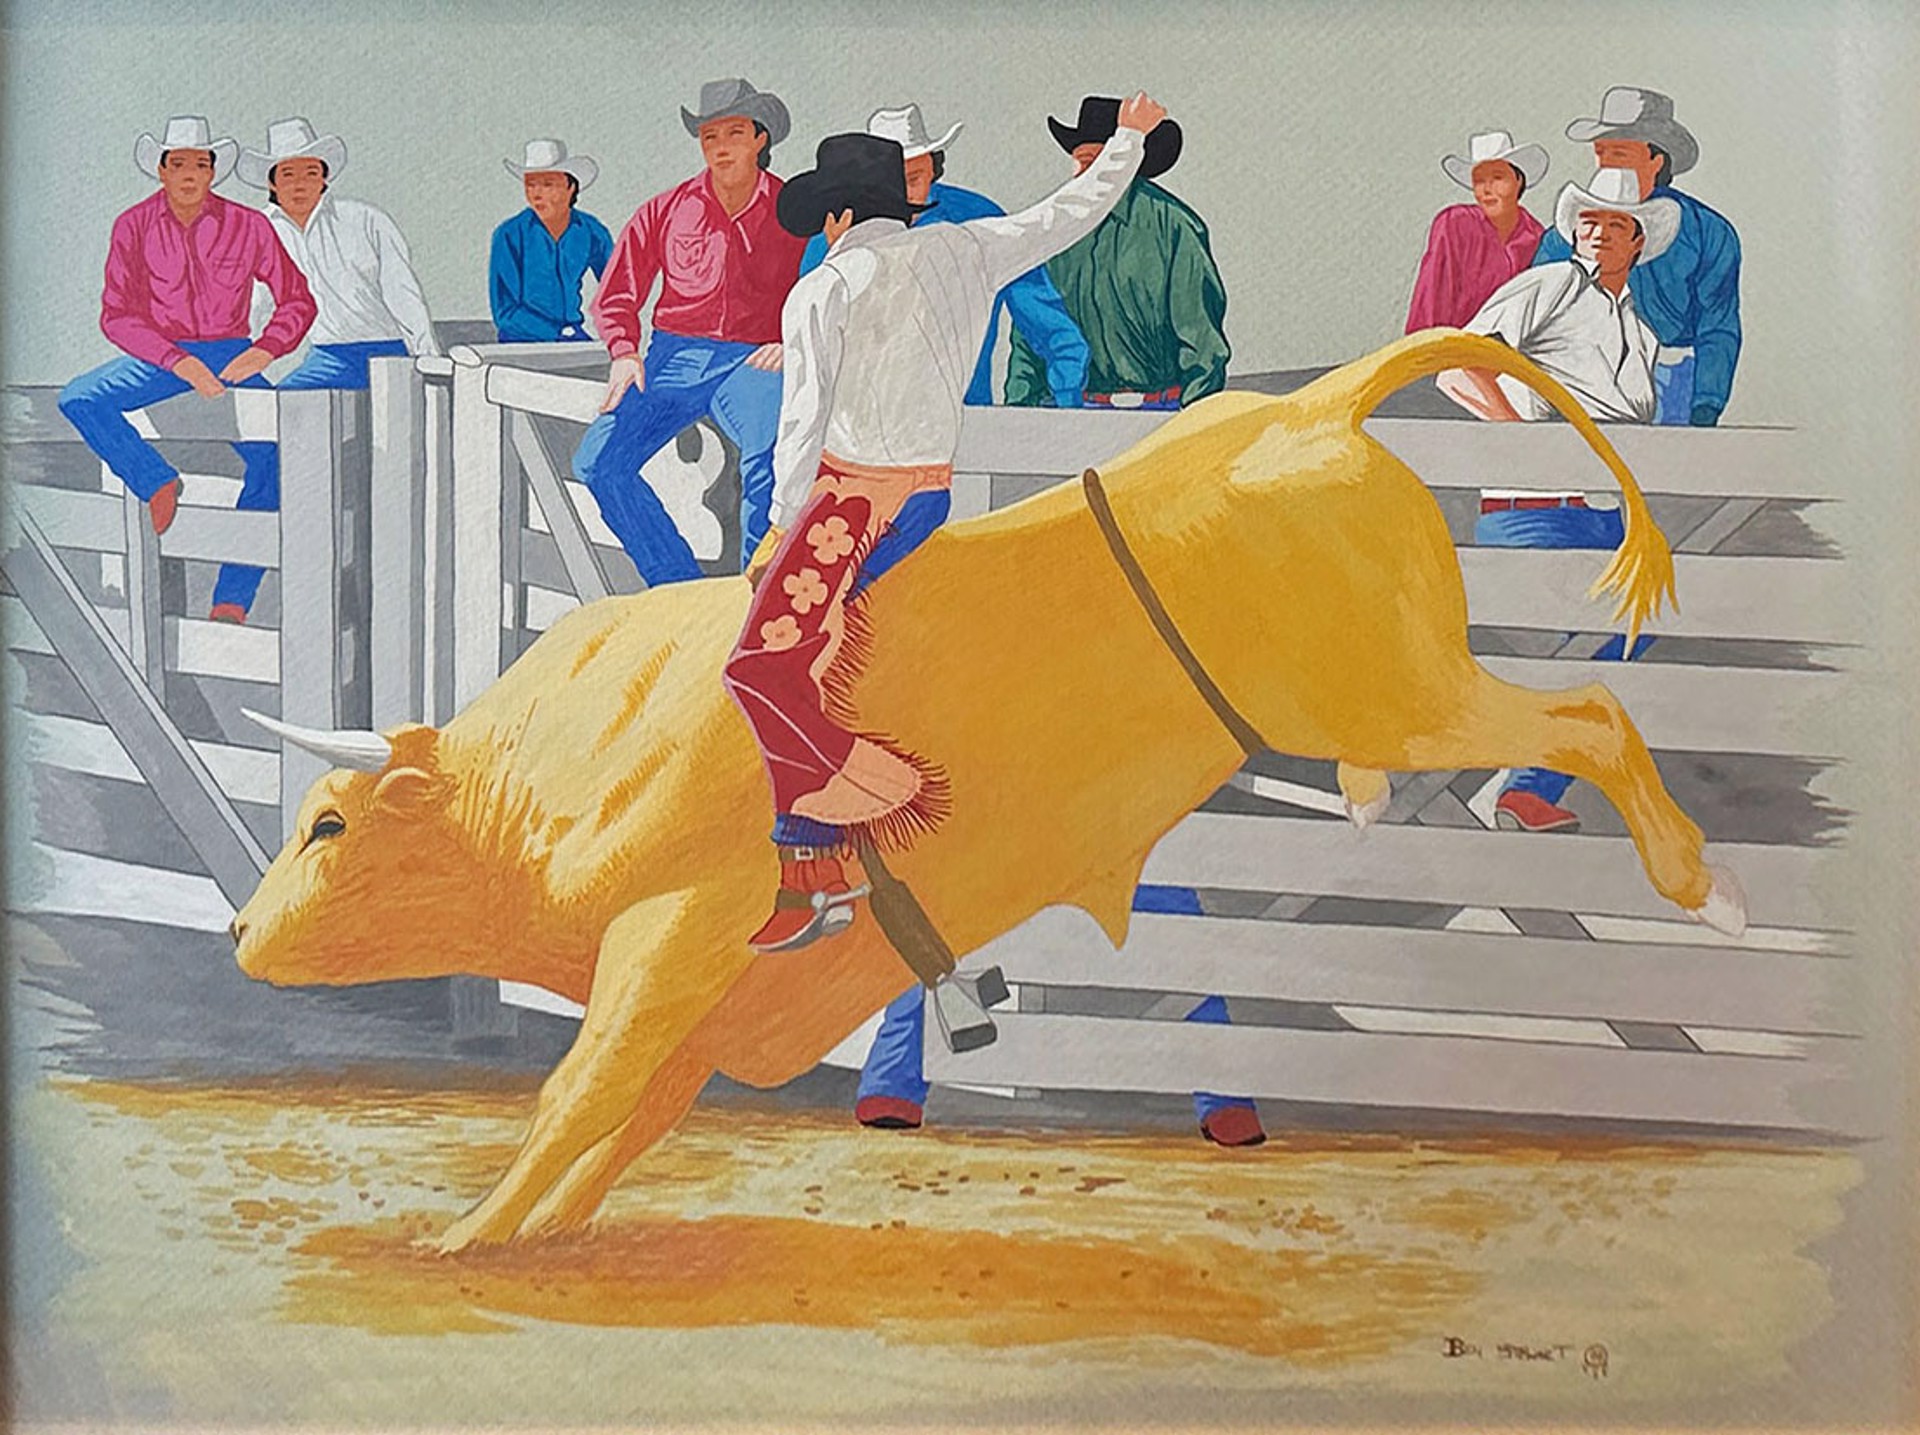 At the Rodeo, Bucking Bull by Ben Stewart